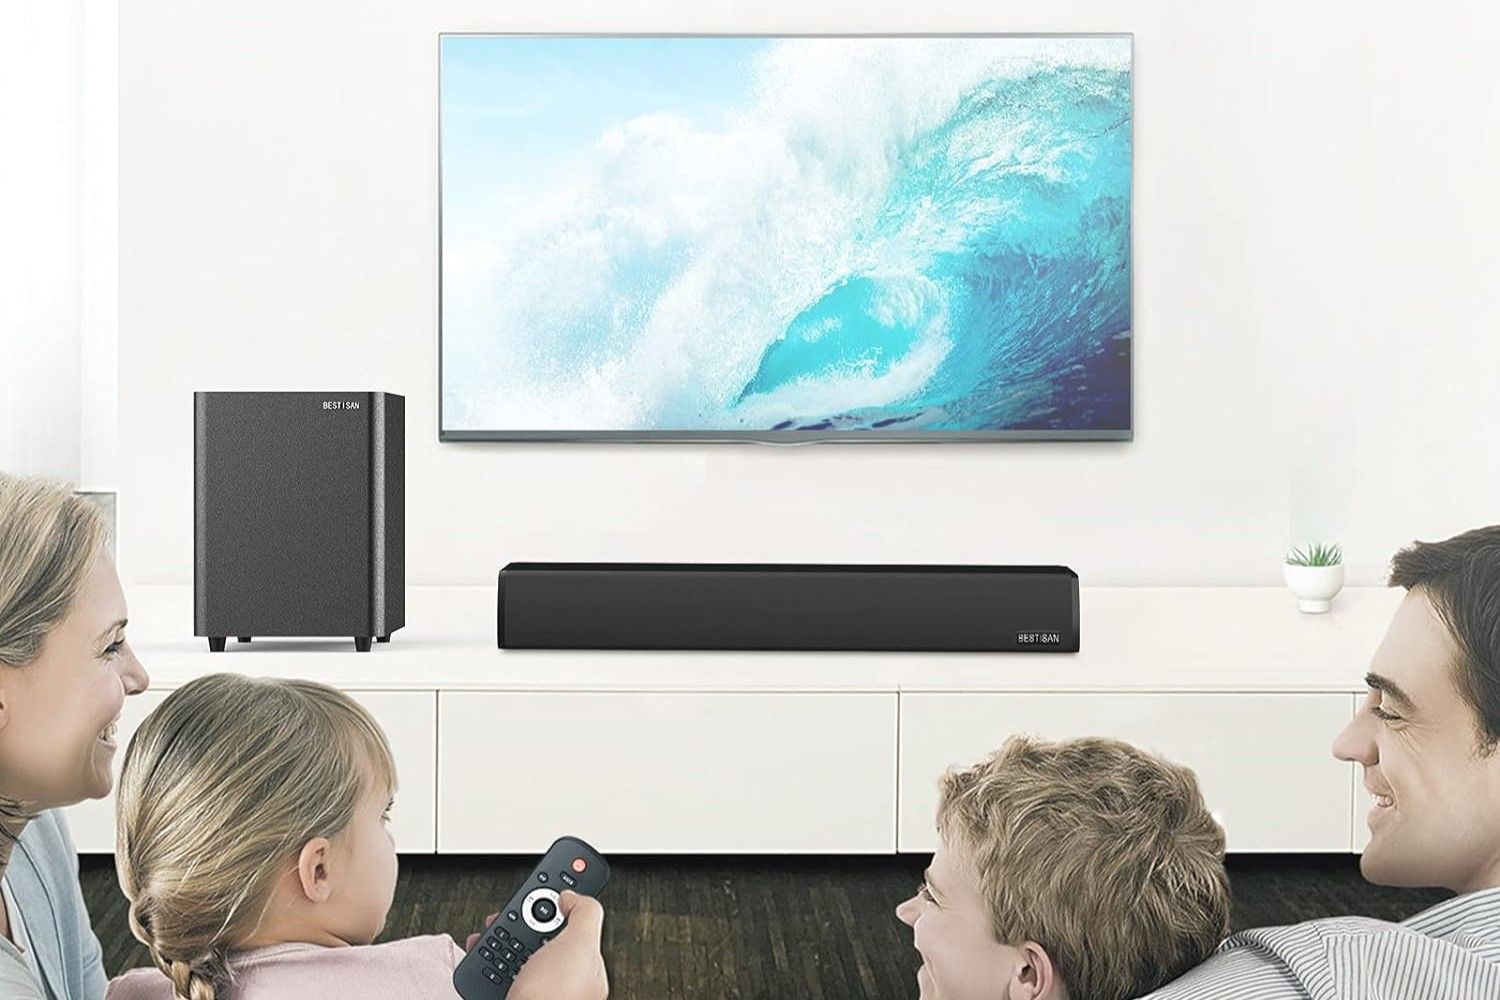 Bestisan subwoofer on a TV stand next to a sound bar and TV